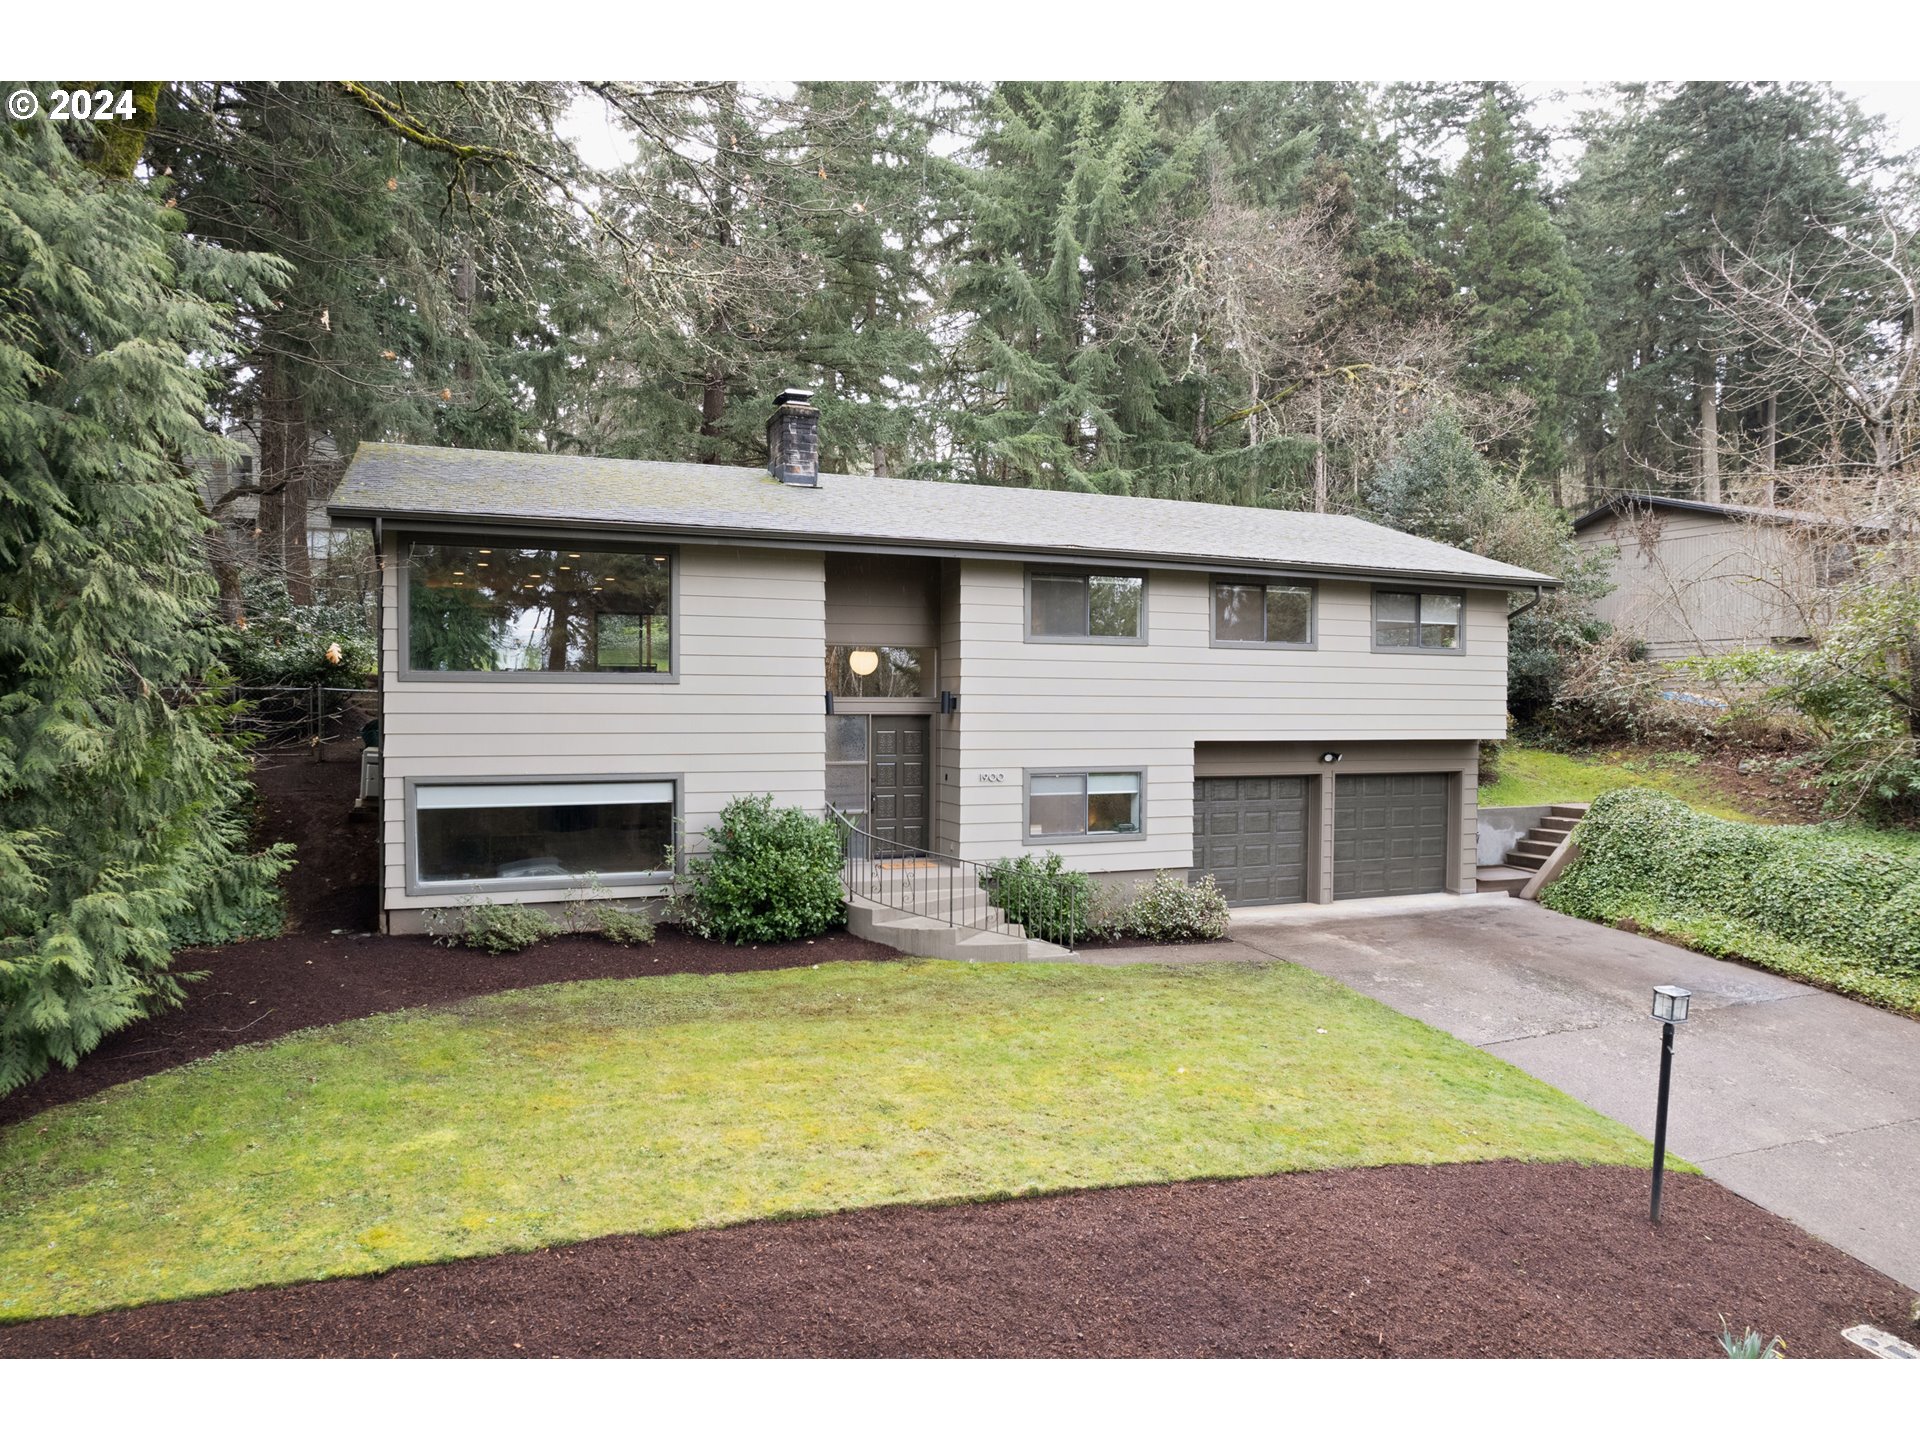 1900 W 29TH AVE, Eugene, OR 